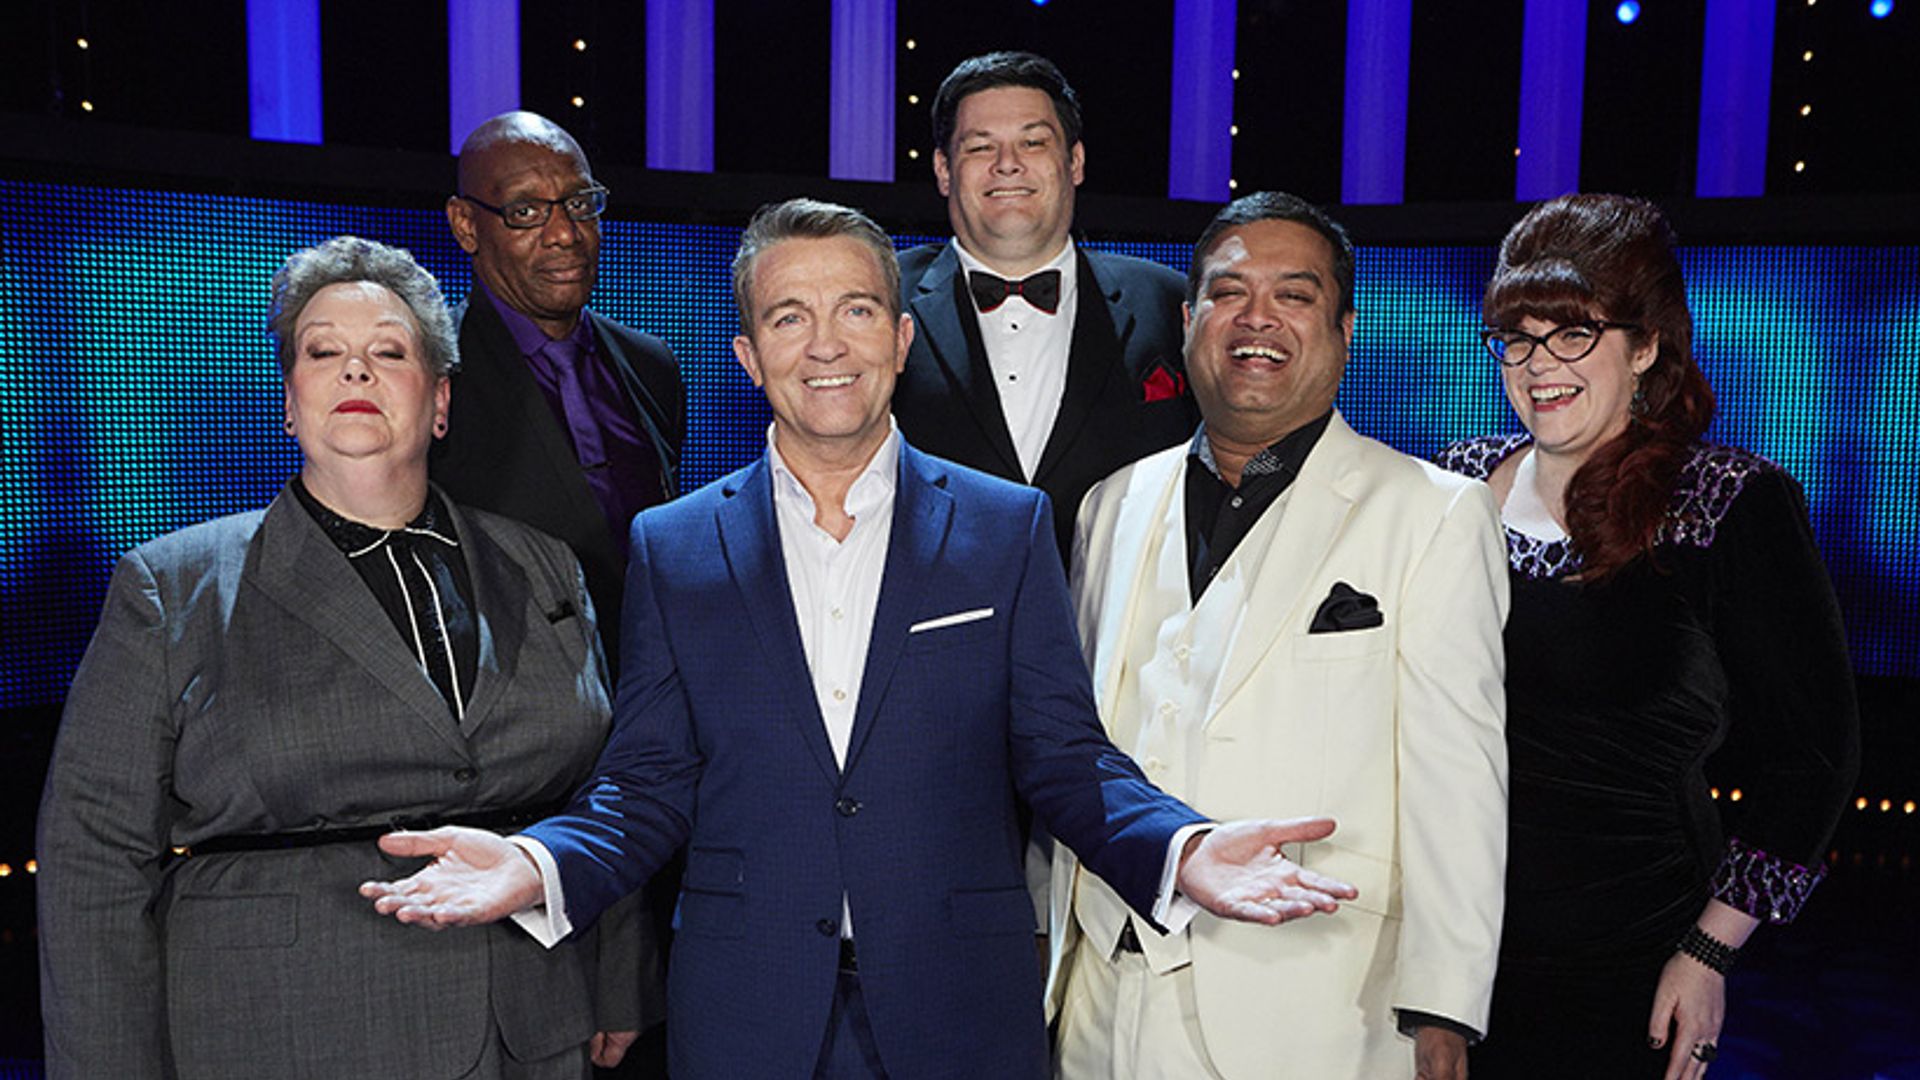 The Chase spin-off show: everything you need to know